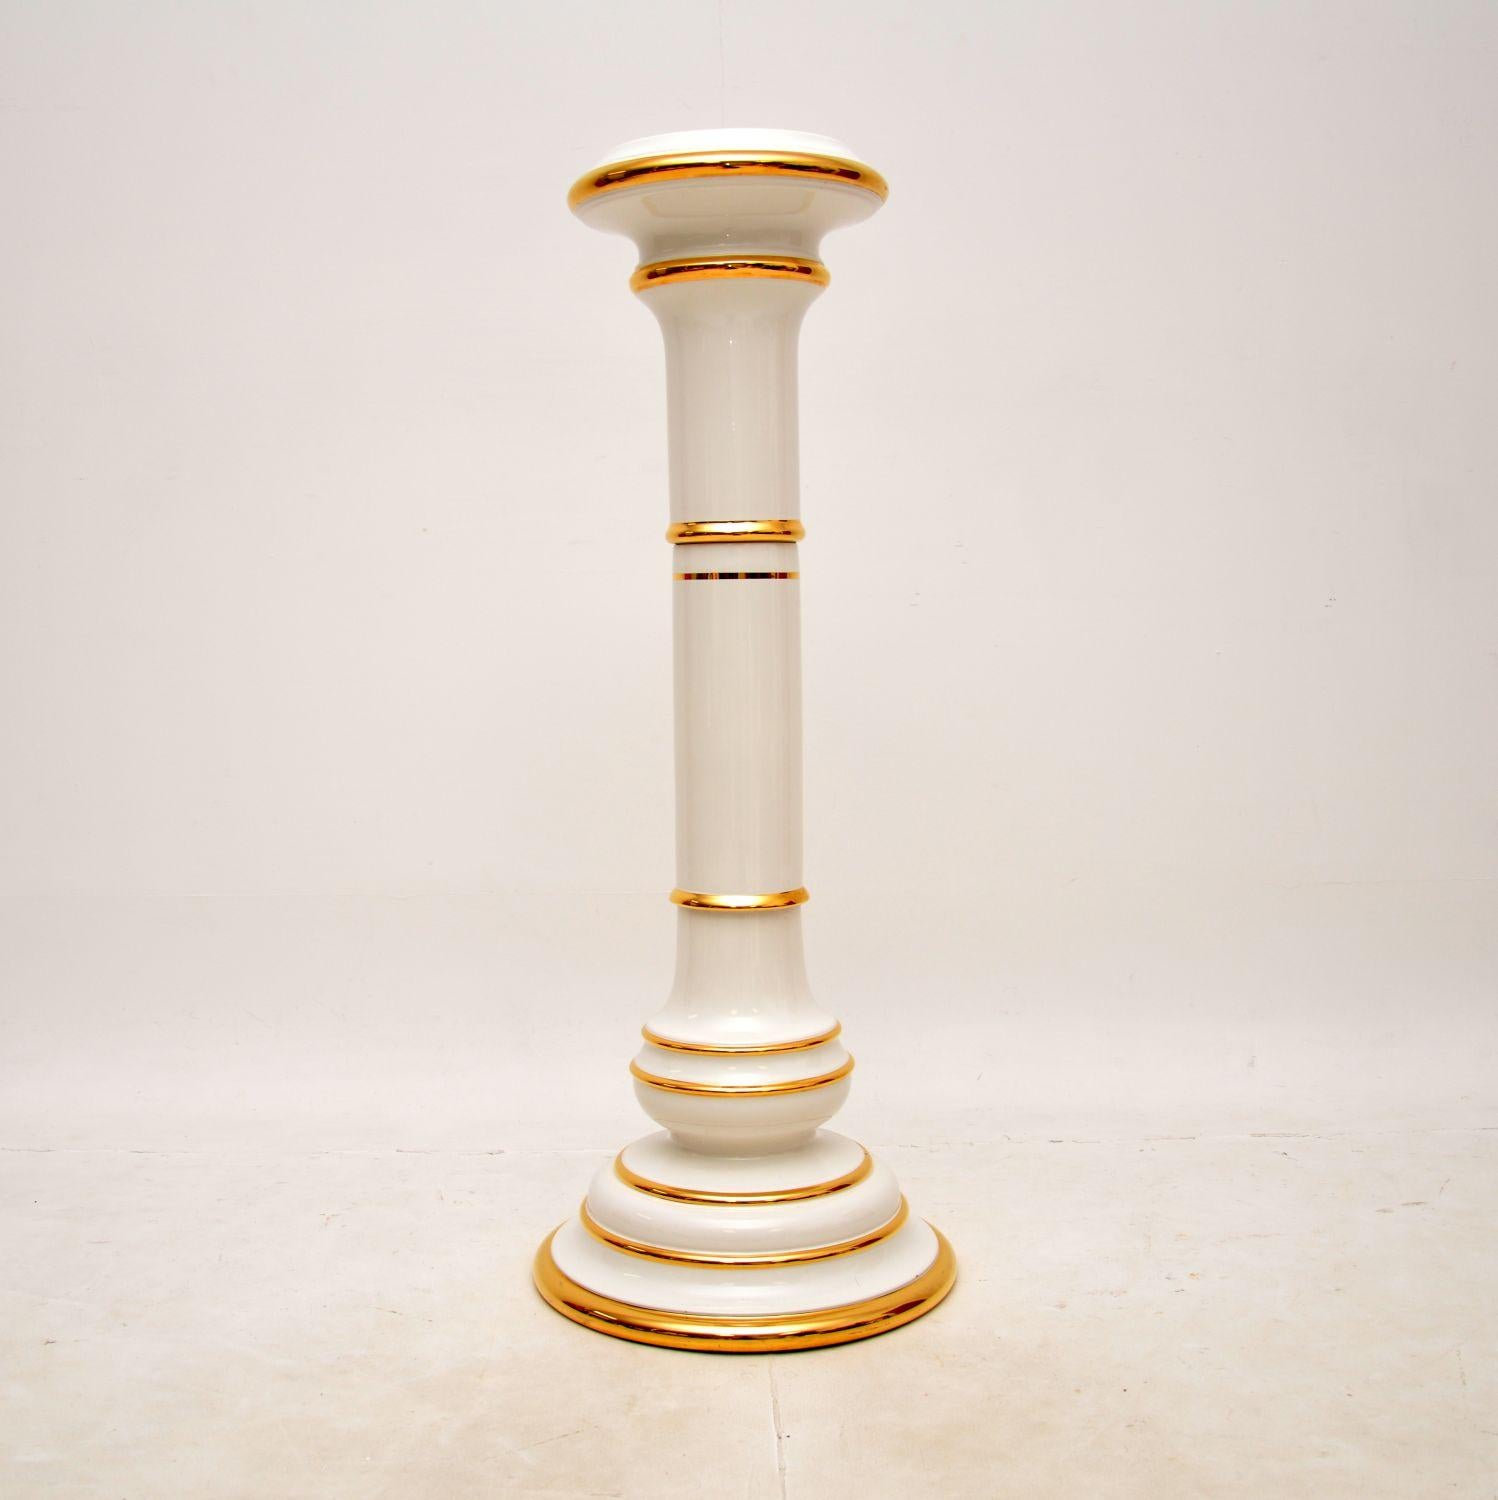 A stylish and very well made vintage Italian porcelain plant stand / pedestal column. This was made in Italy and dates from the 1970’s.

It is of superb quality and is a very useful size to display house plants or even to be used as a lamp